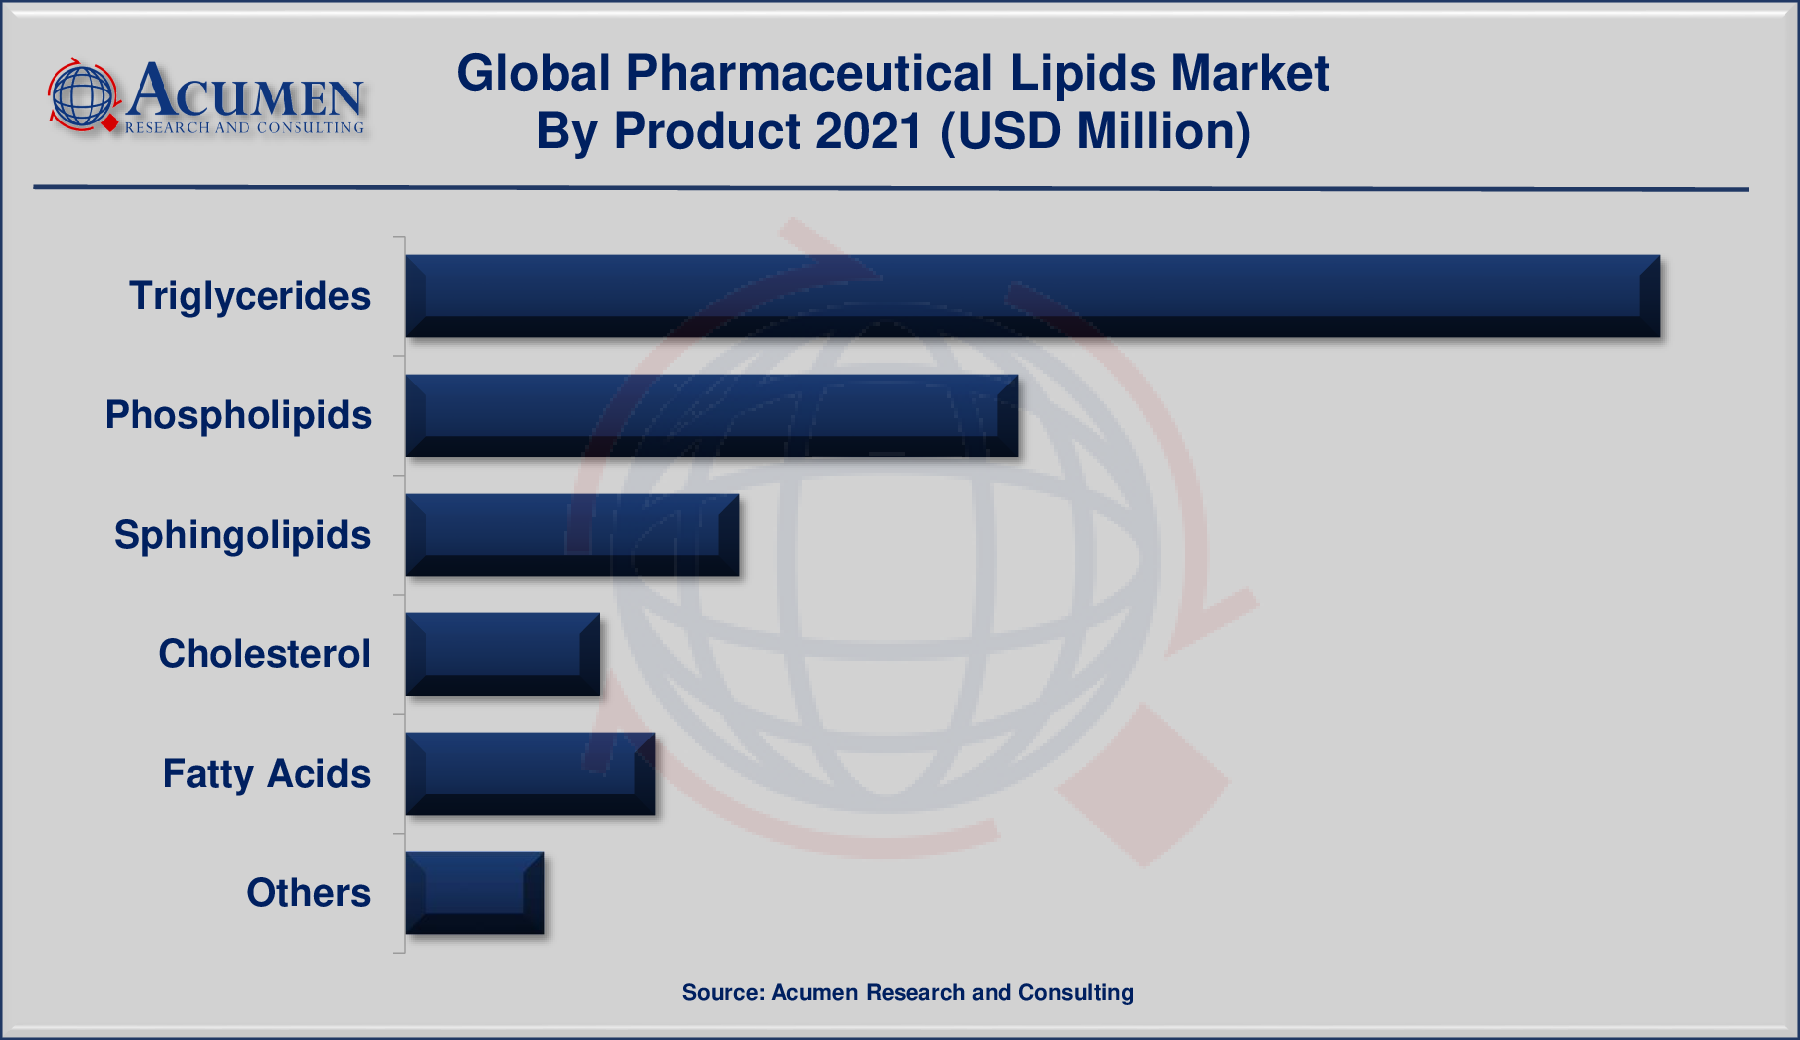 Pharmaceutical Lipids Market By Product is predicted to be worth USD 6,617 Million by 2030, with a CAGR of 5.4%